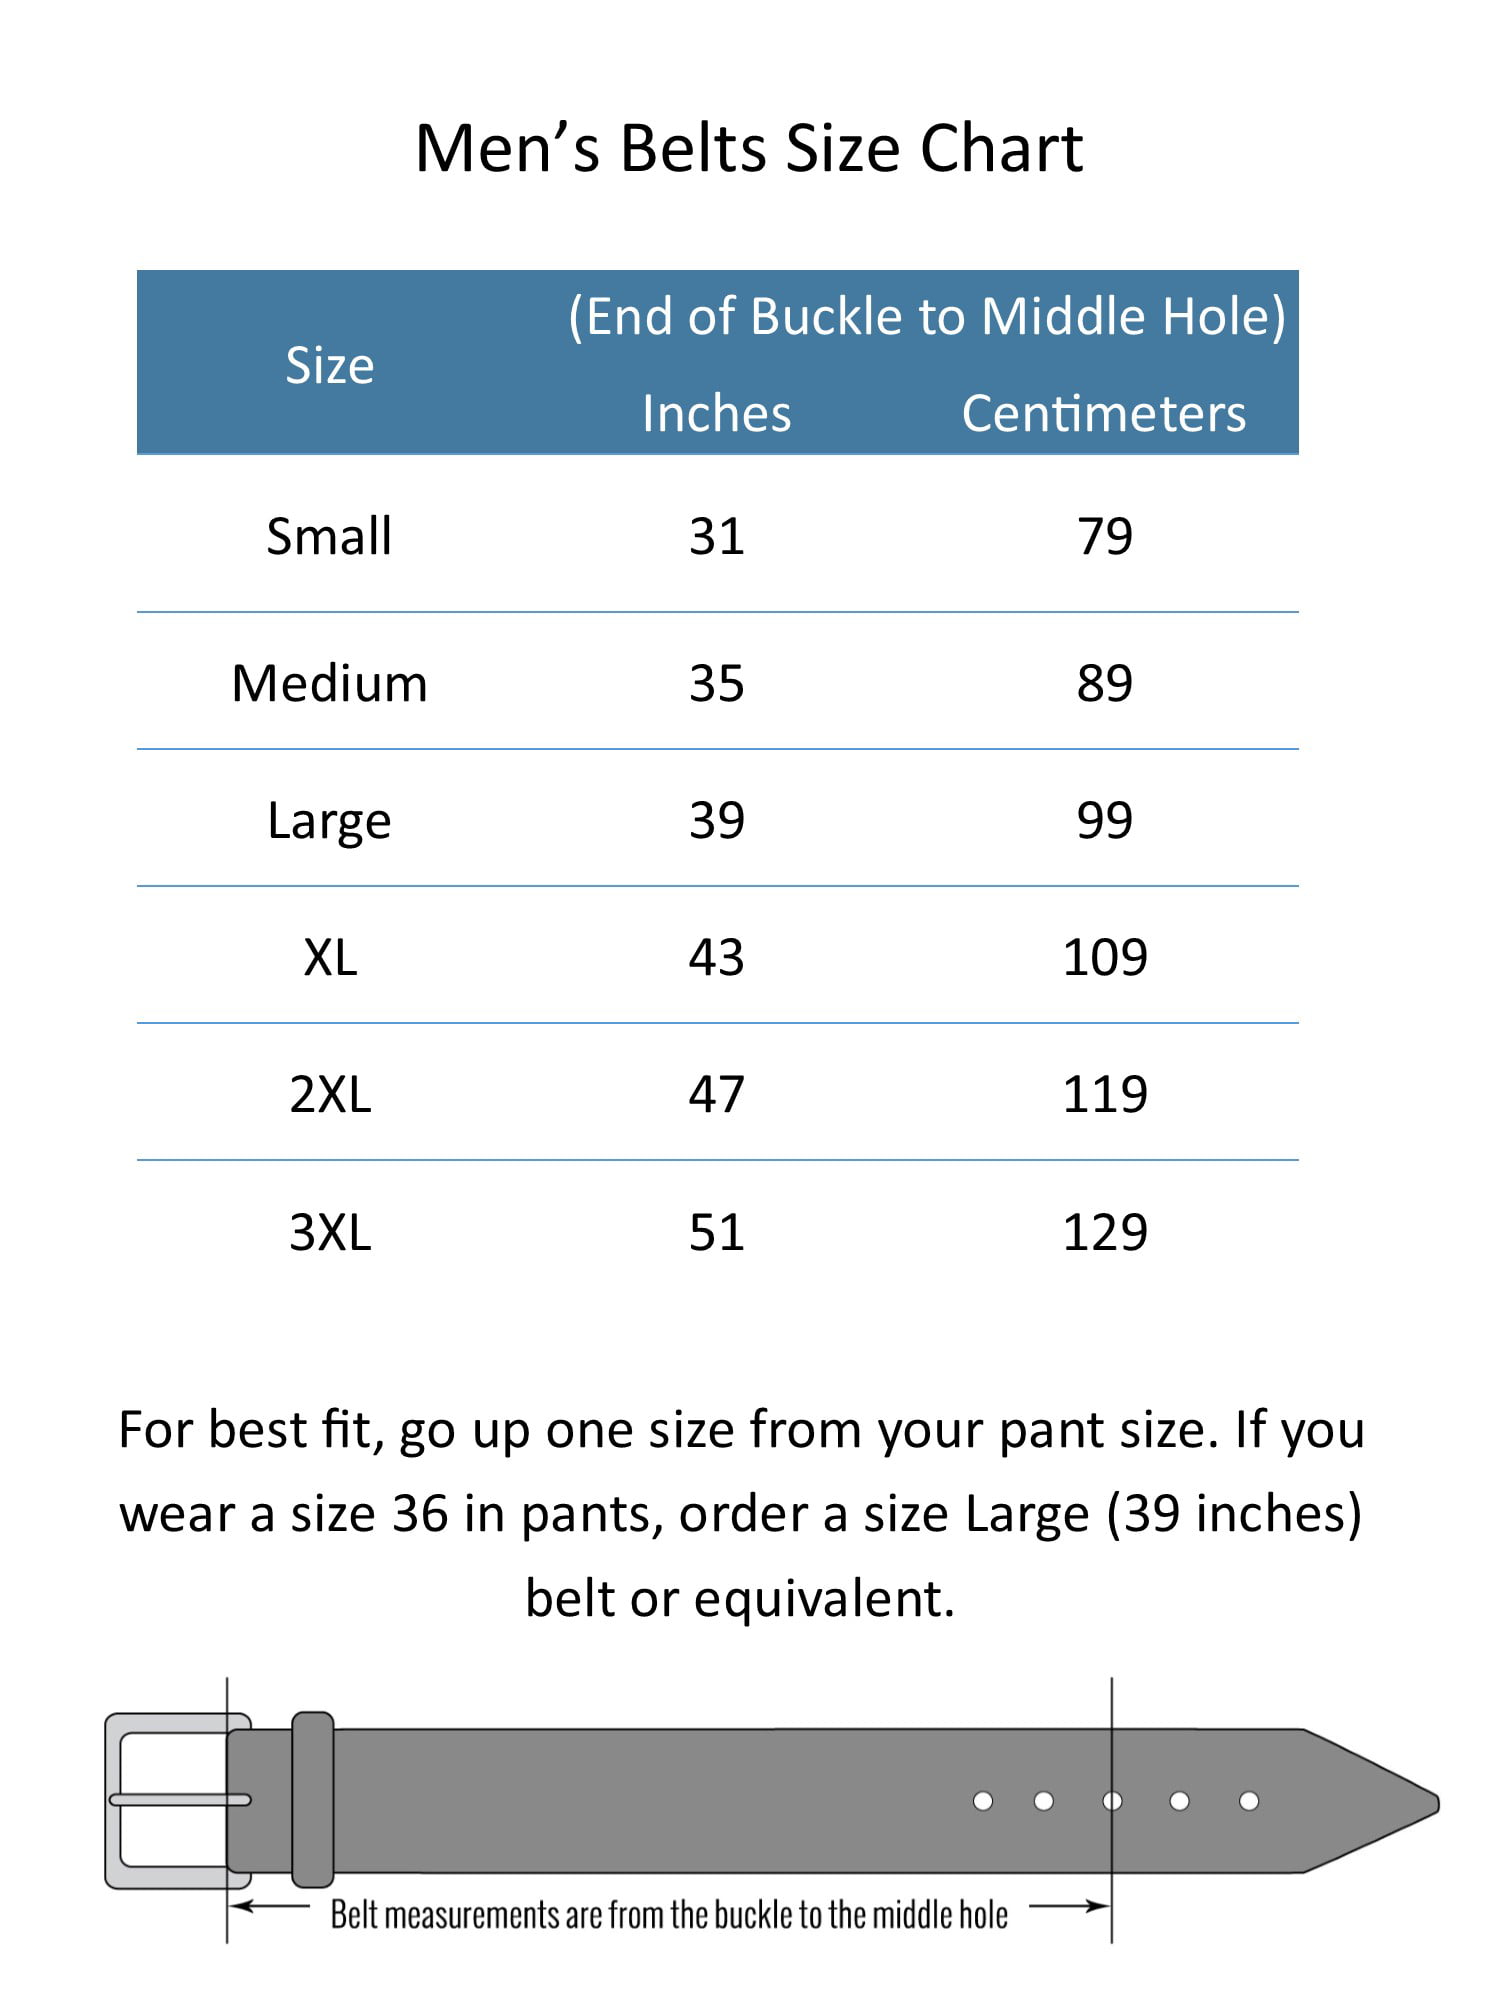 Buckle Size Chart